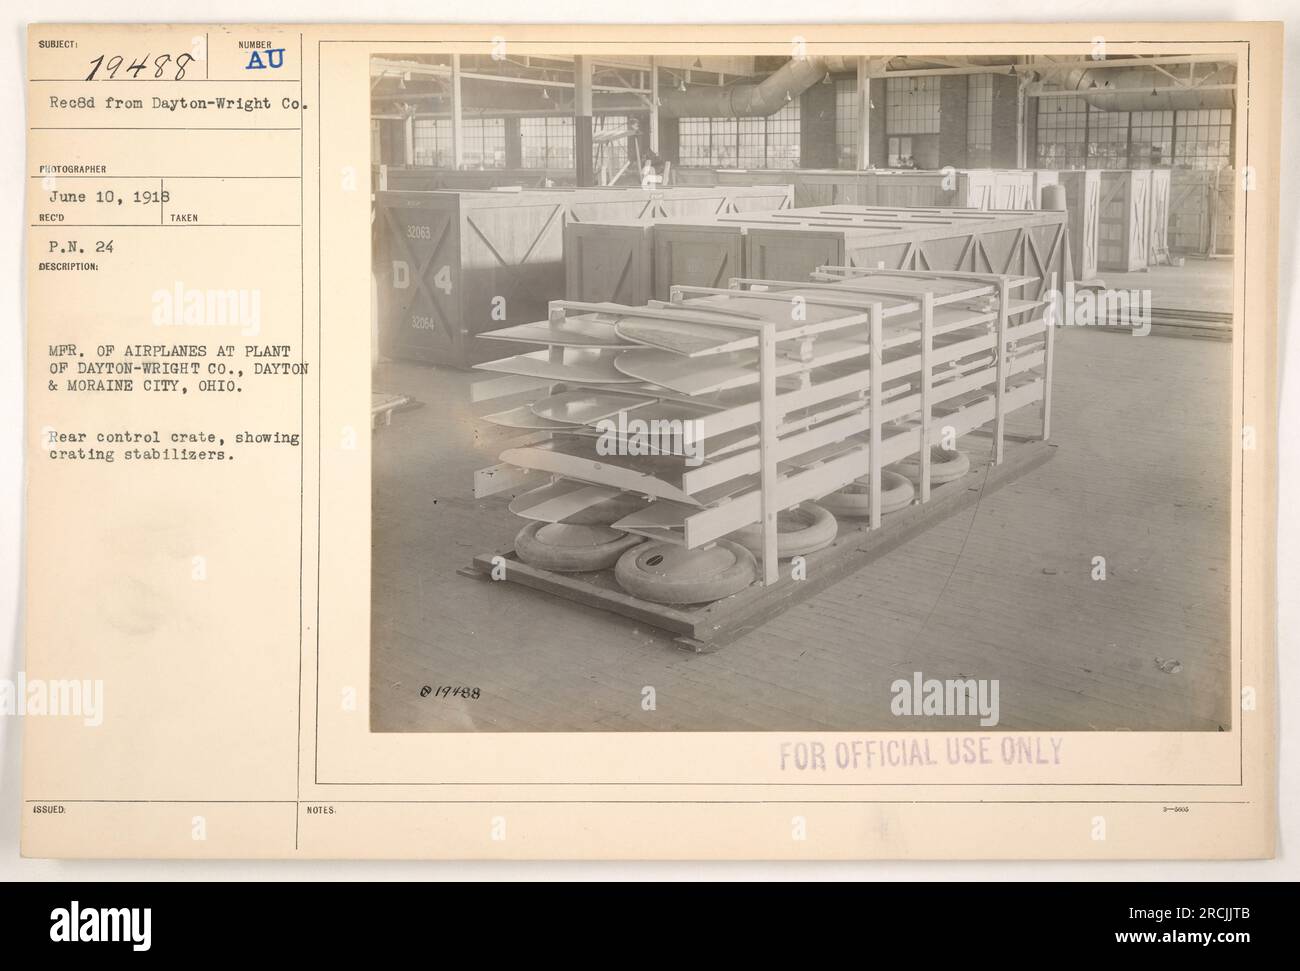 Rear control crate of airplanes being manufactured at the Dayton-Wright Co. plant in Dayton & Moraine City, Ohio during World War One. The crate is shown with crating stabilizers. Image taken on August 4, 1918. Image number: 111-SC-19488. Caption is for official use only. Stock Photo